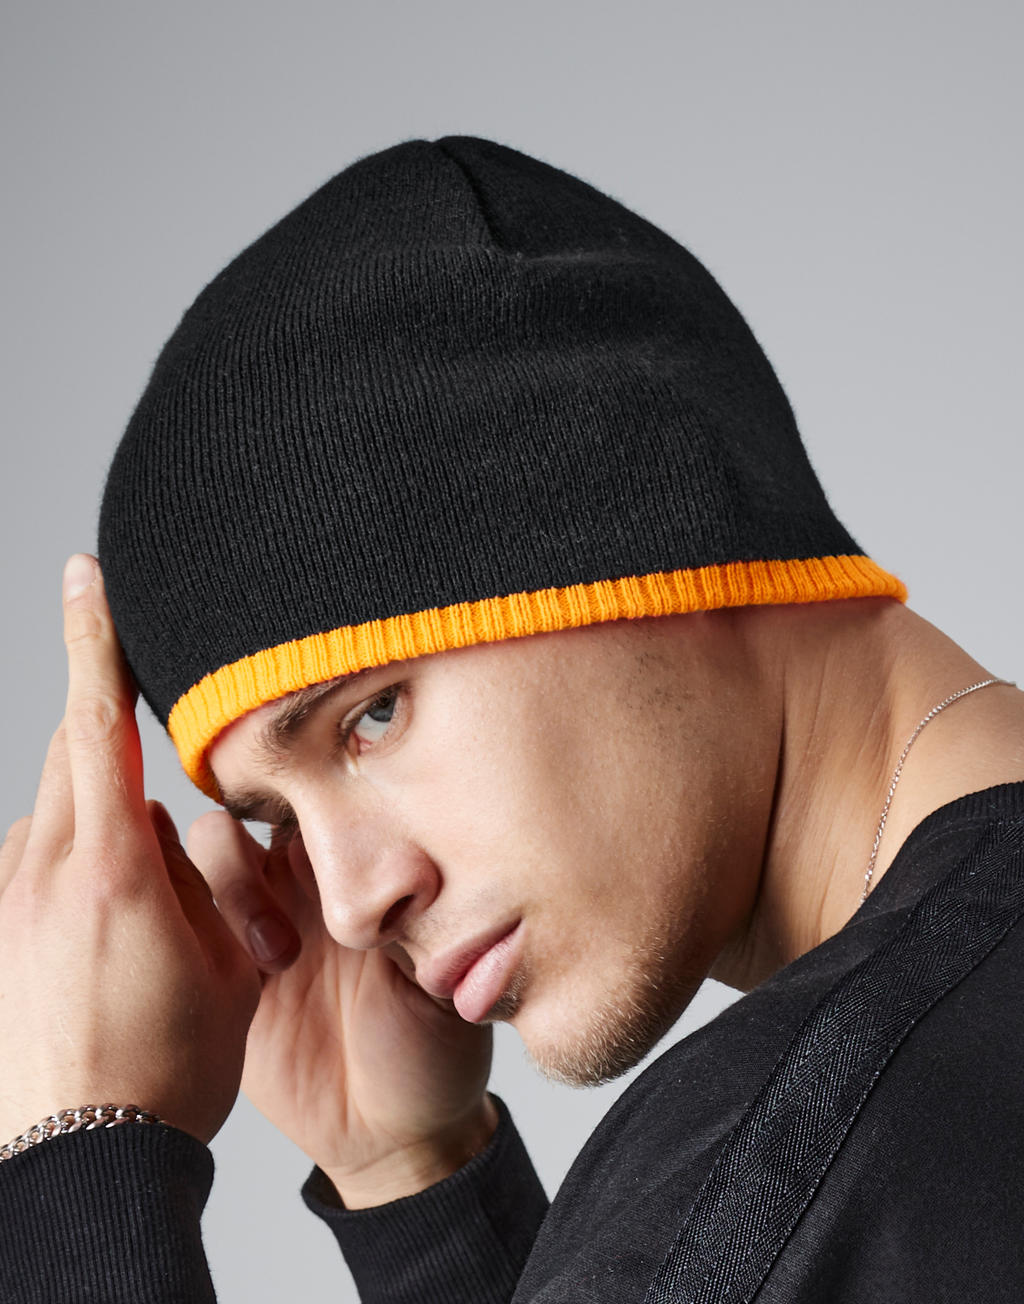  Two-Tone Beanie Knitted Hat in Farbe Black/Fluorescent Yellow